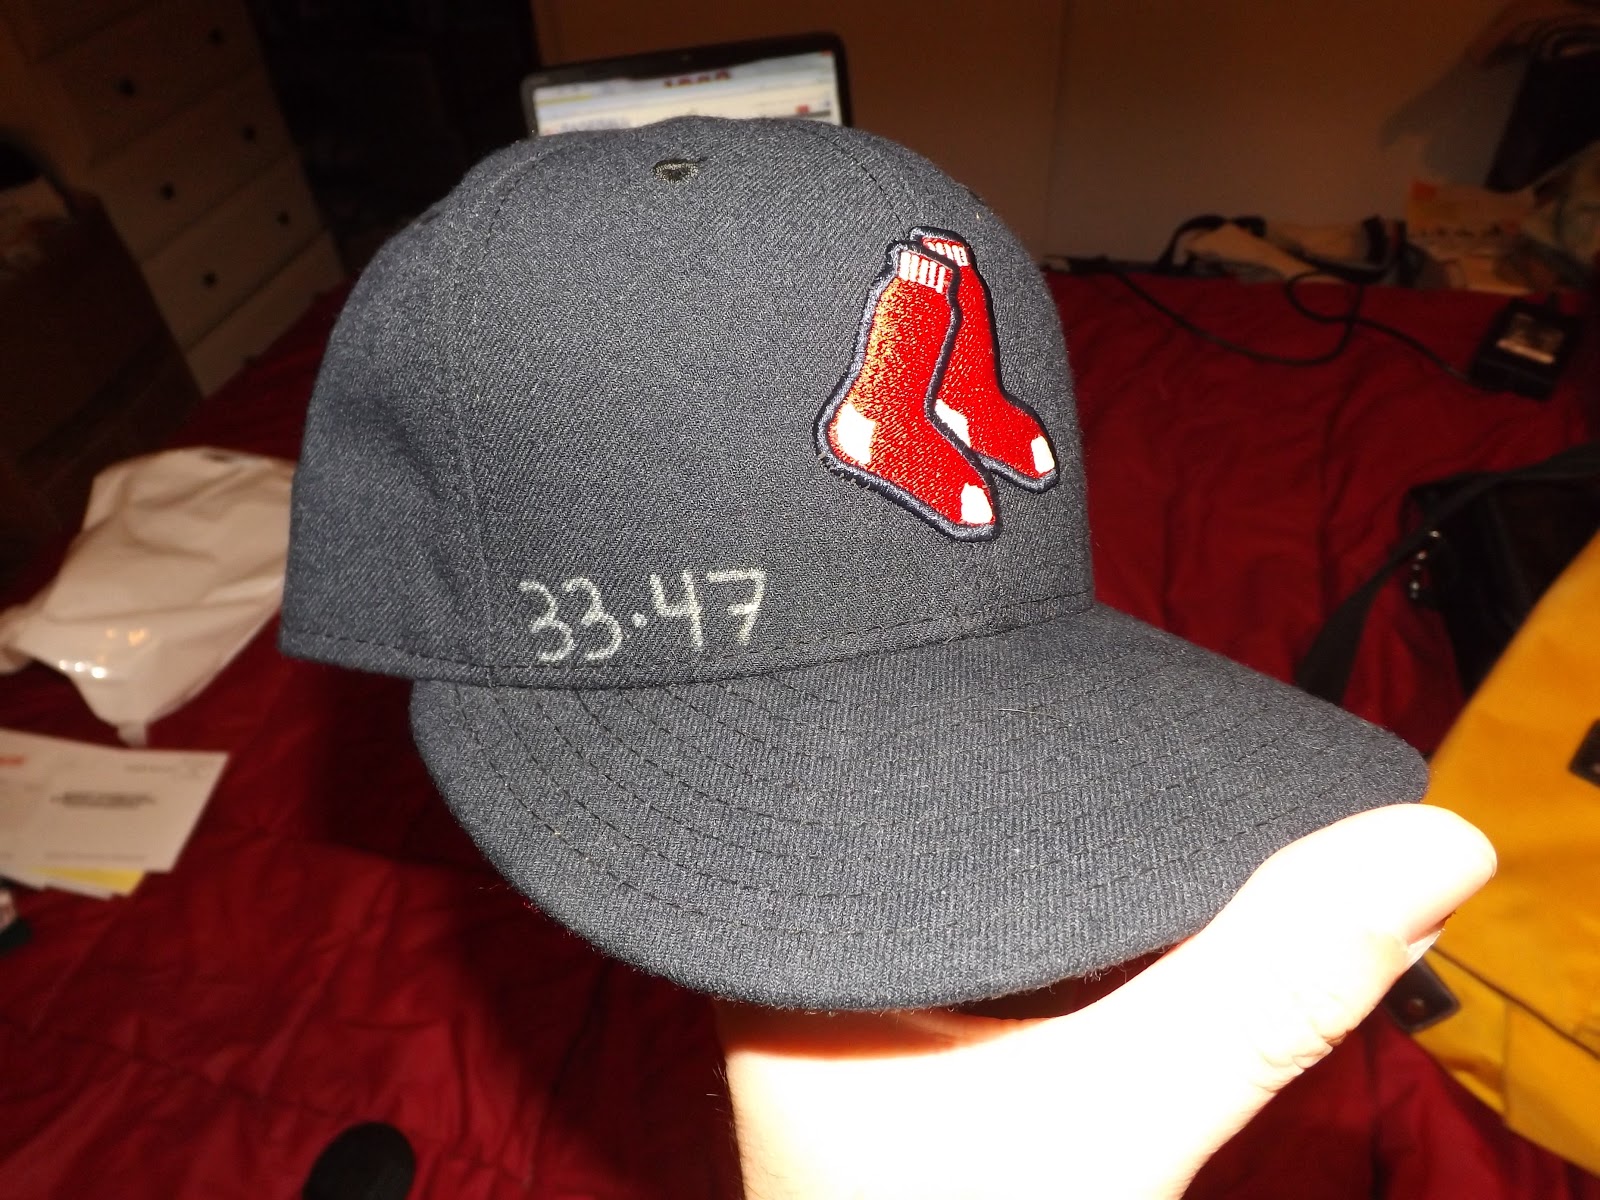 Hats and Tats: A Lifestyle: January 24- Boston Red Sox